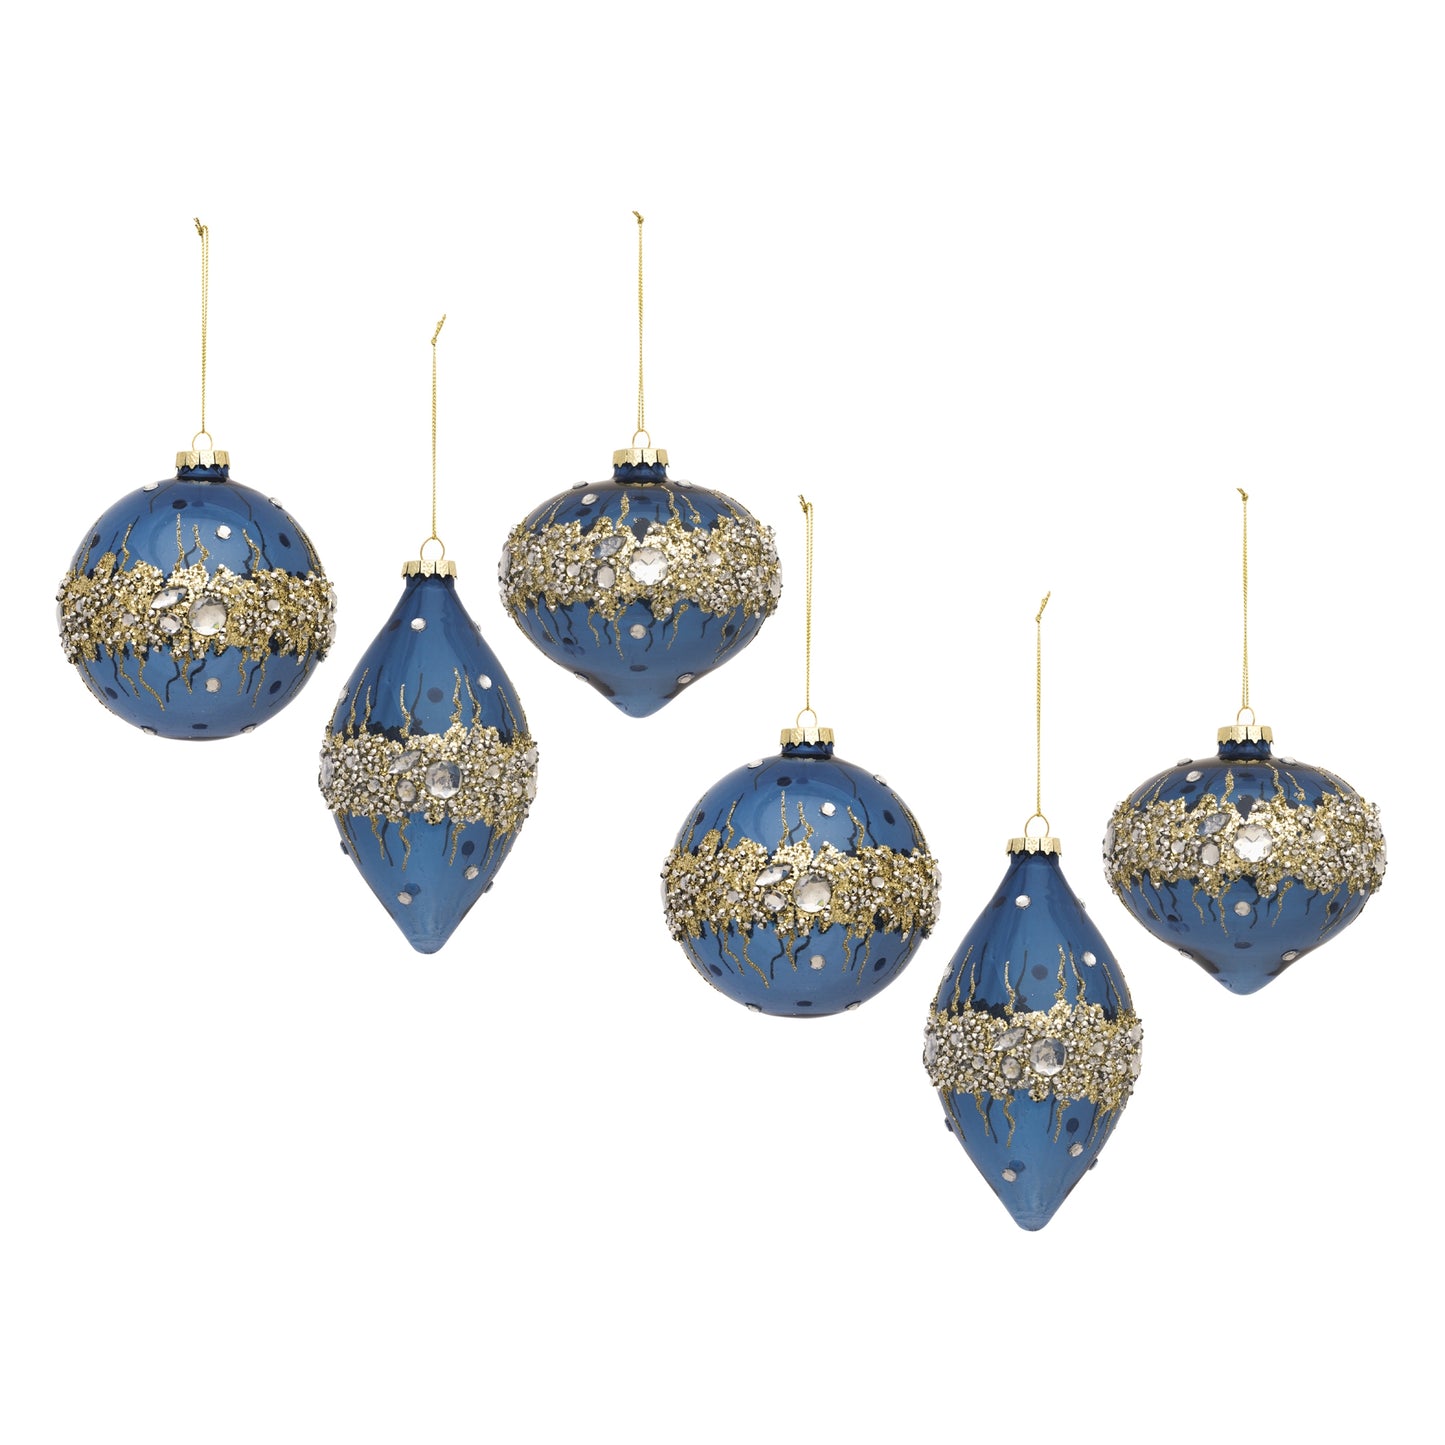 Blue Glass Ornament with Gold Bead Accent (Set of 6)